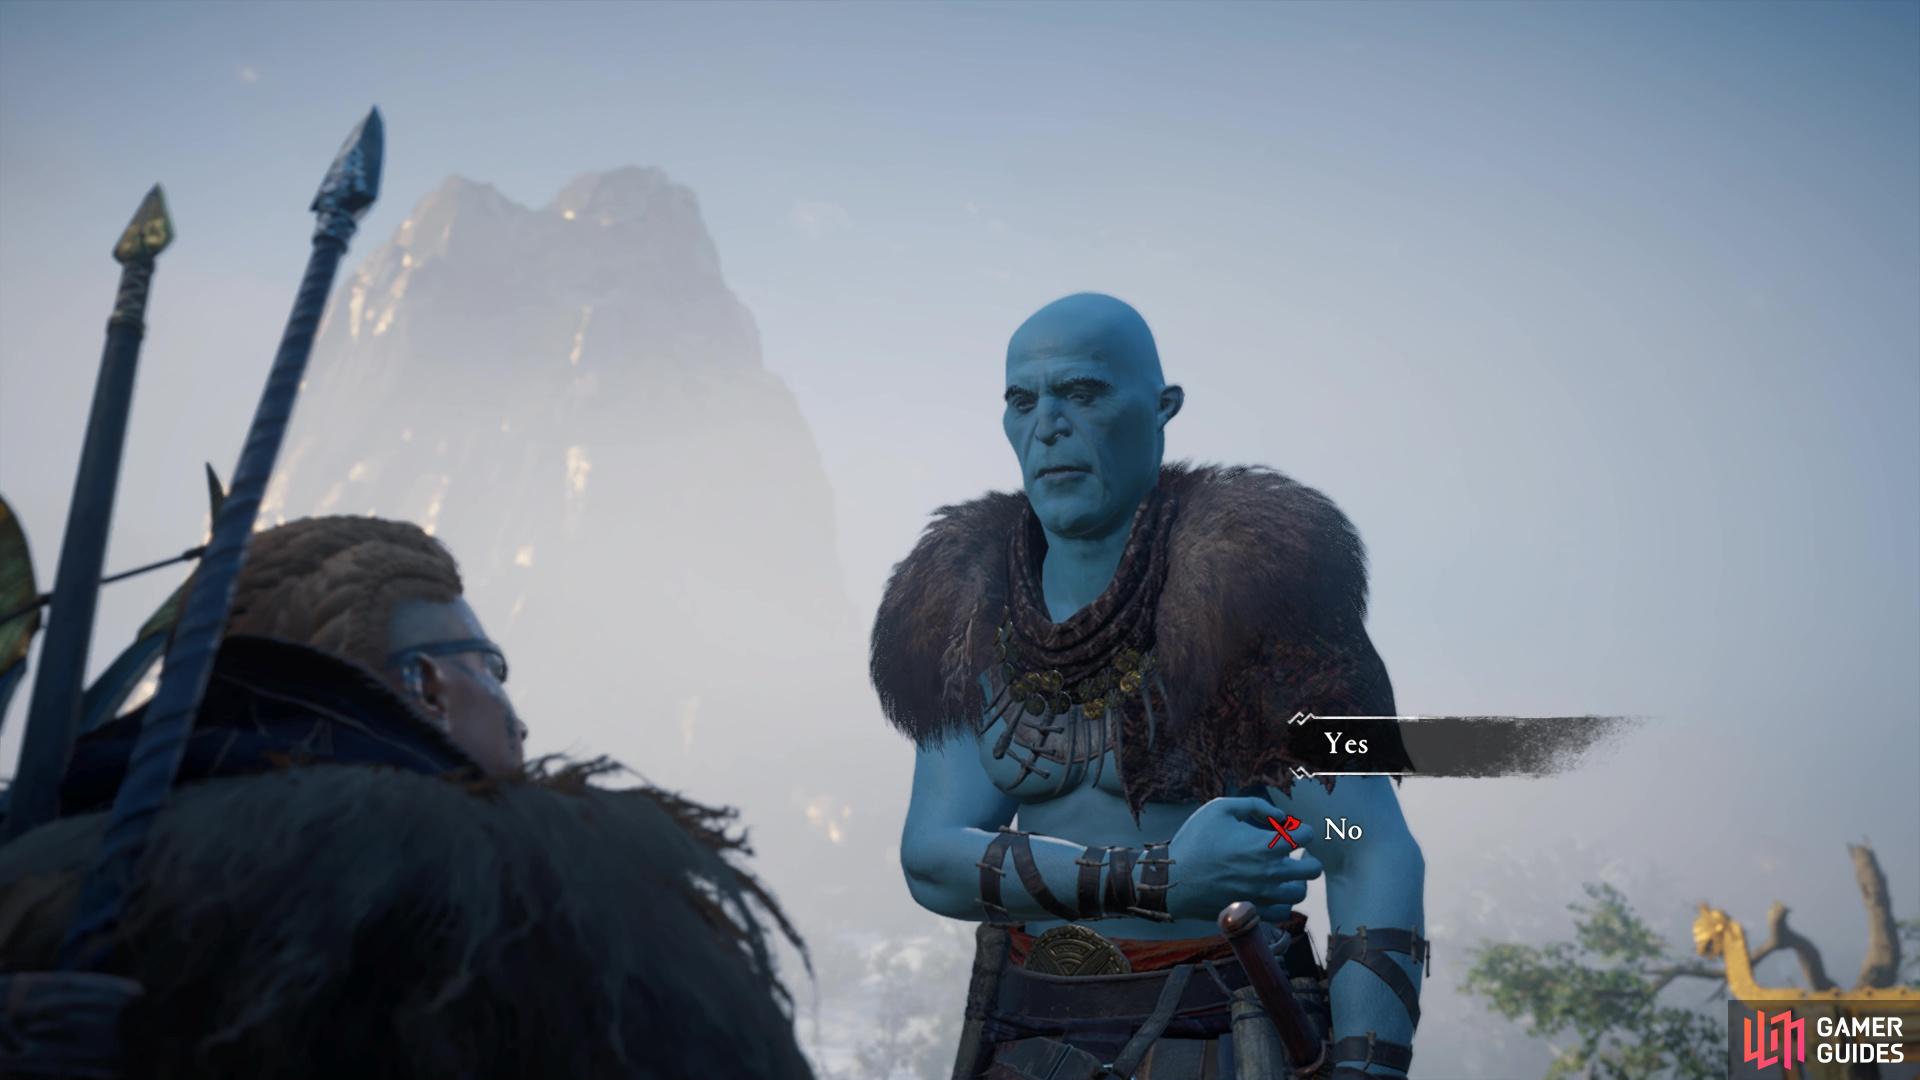 Will you spare the Jotun enemy now hes given you information?